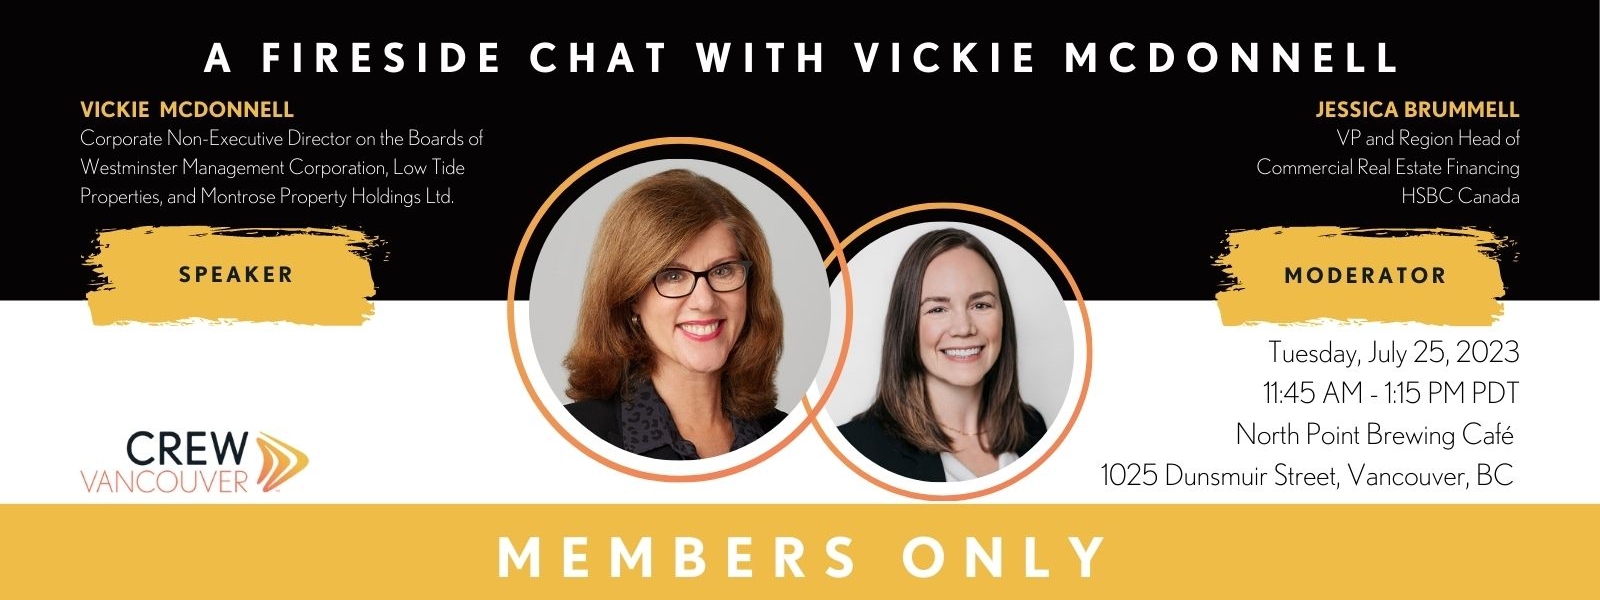 CREW Vancouver Event A Fireside Chat with Vickie McDonnell 2023 07 25 W